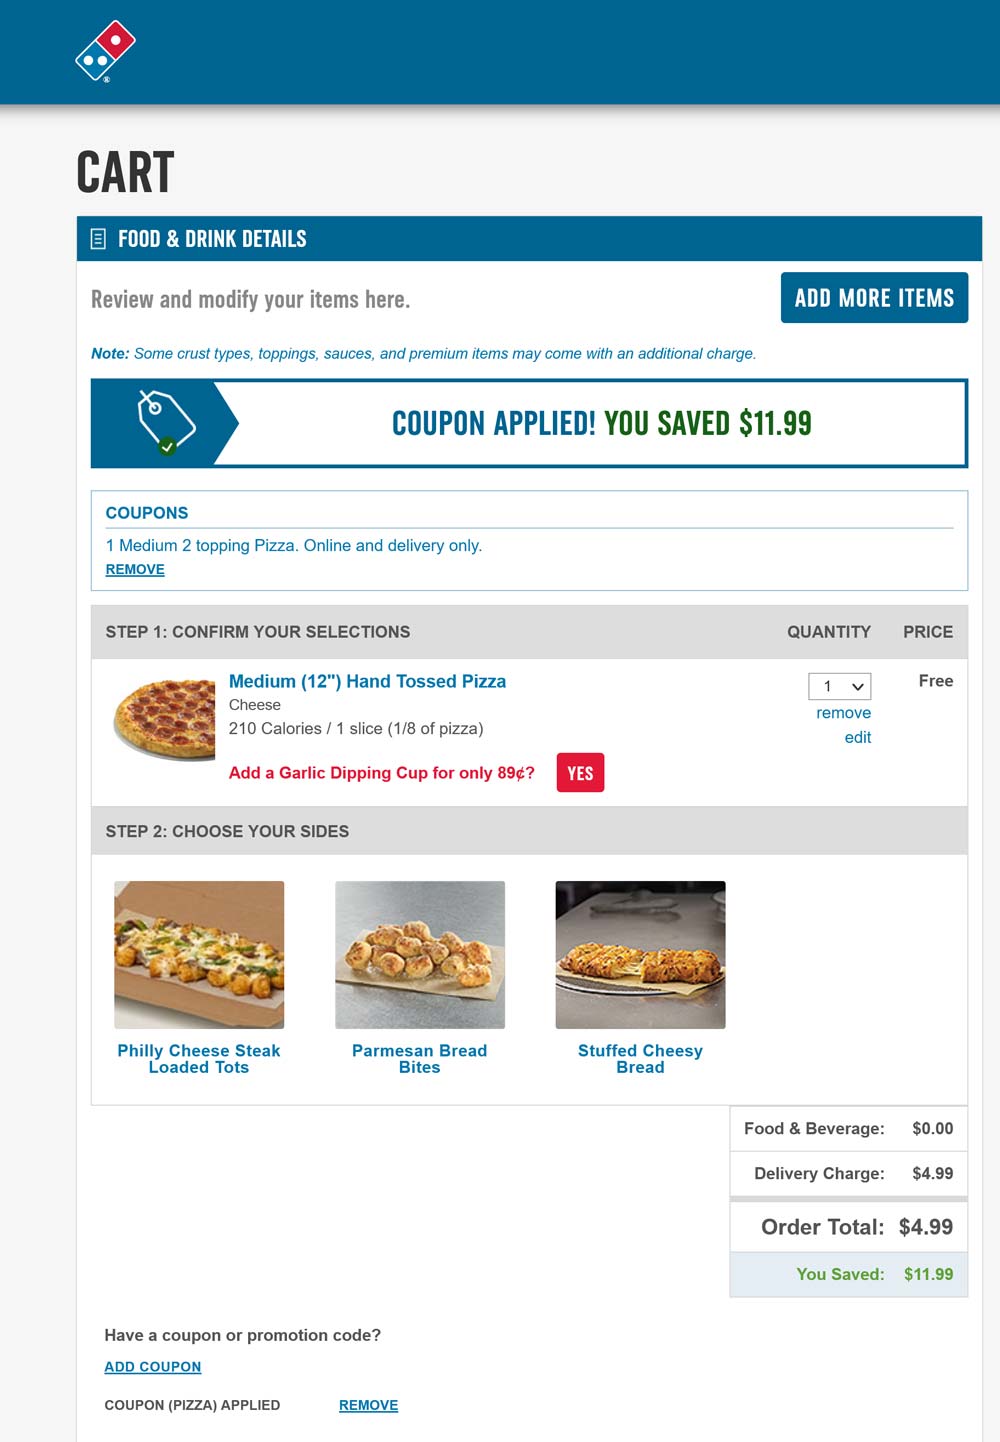 Dominos restaurants Coupon  Free pizza after $5 delivery at Dominos via promo code PIZZA #dominos 